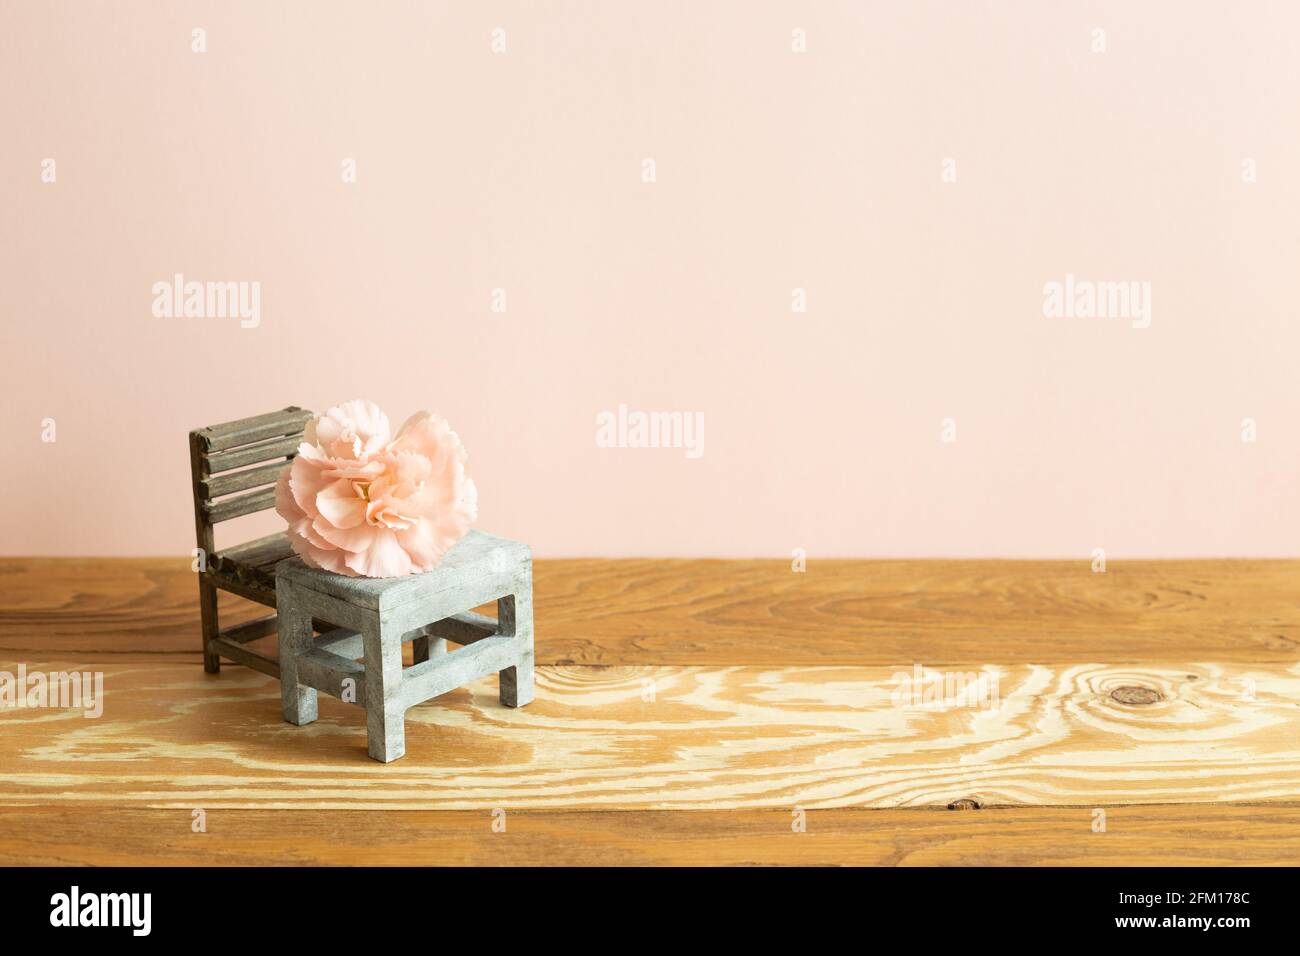 Pink carnation flower on school desk with empty chair Stock Photo